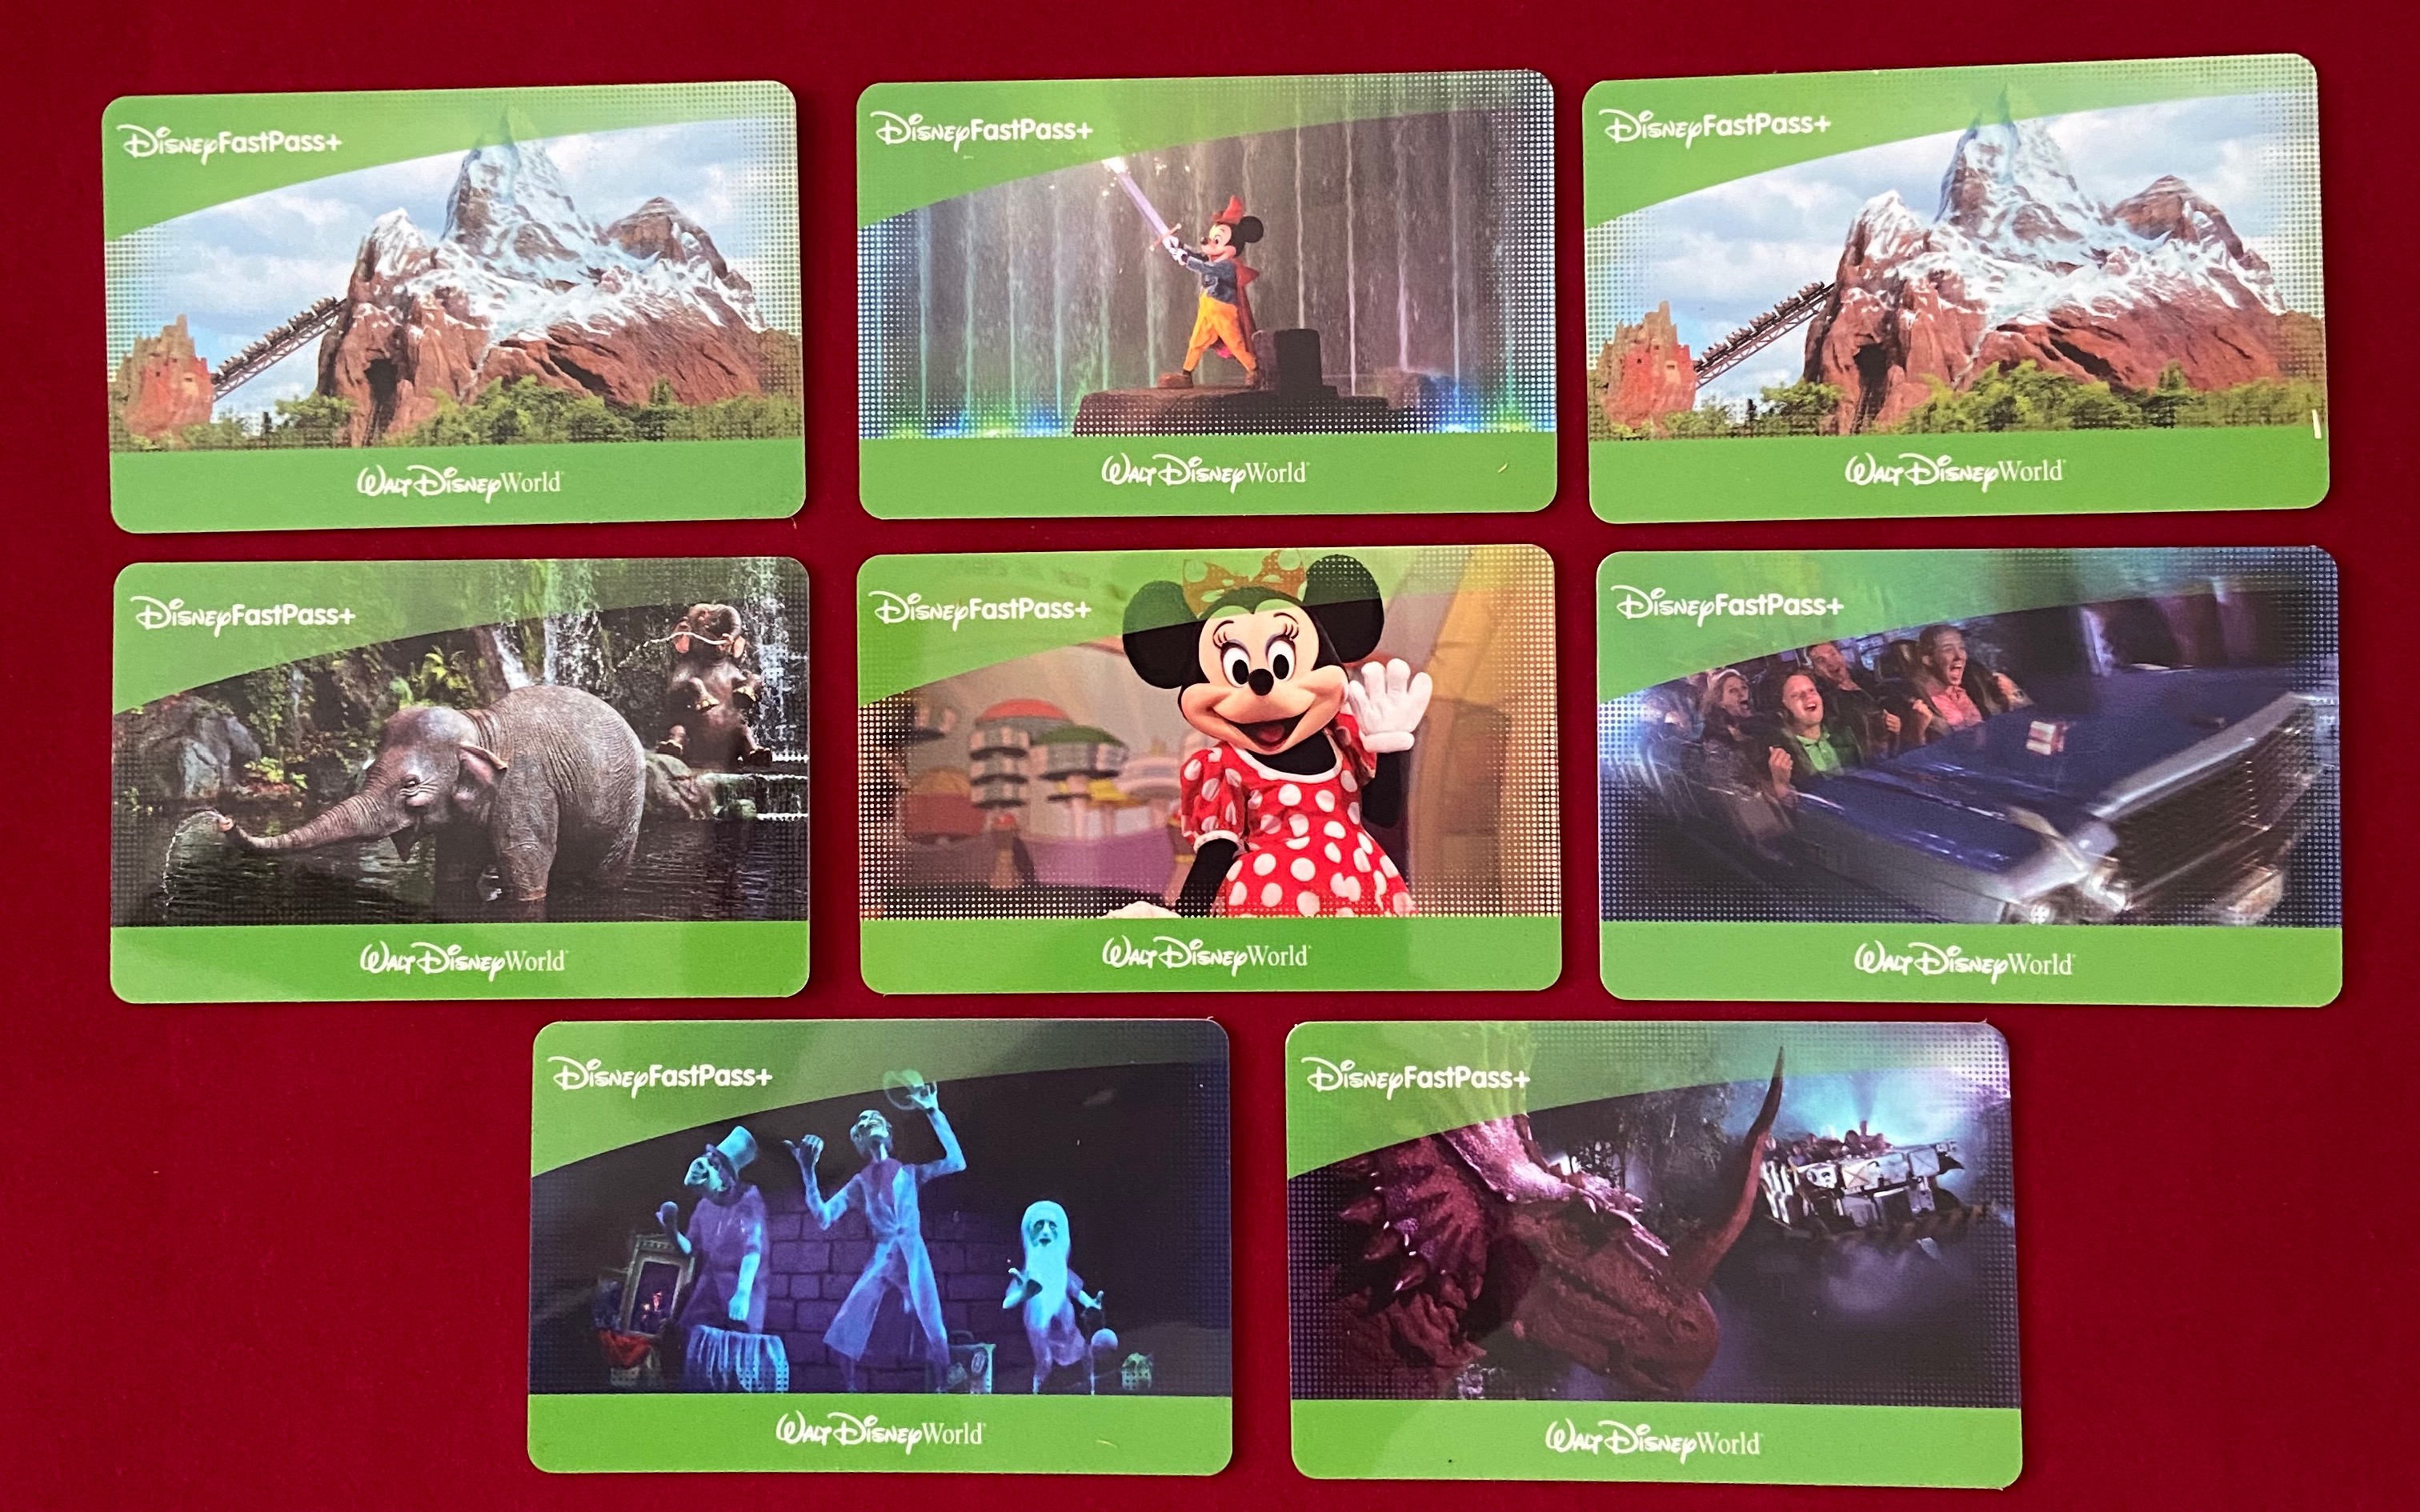 8 one day all inclusive passes to Disney World! on Social.fund